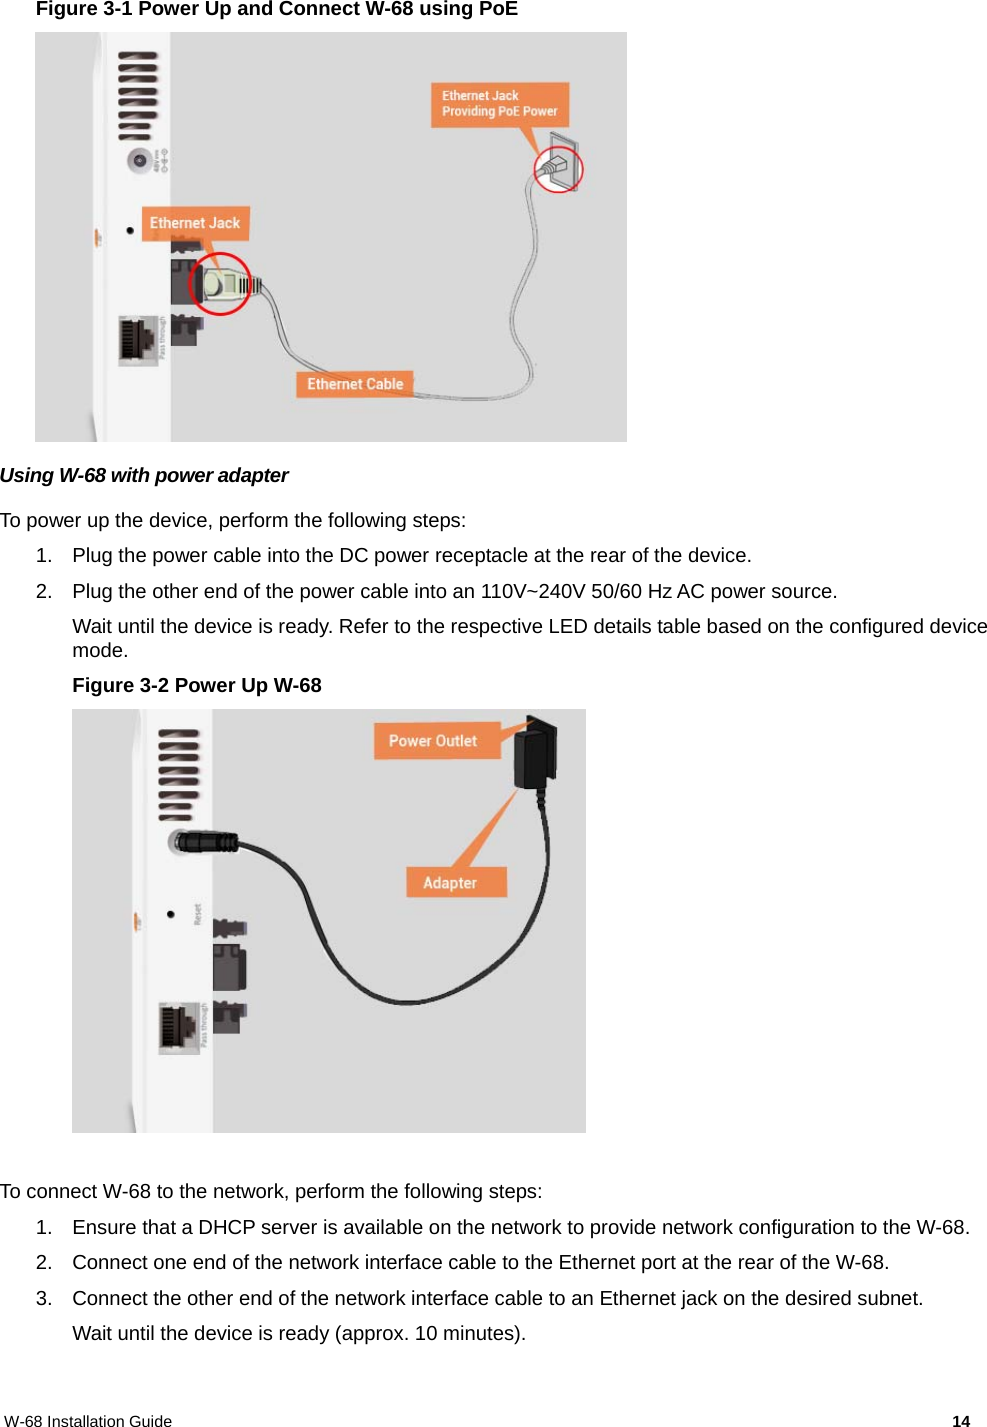 W-68 Installation Guide     14 Figure 3-1 Power Up and Connect W-68 using PoE  Using W-68 with power adapter To power up the device, perform the following steps: 1.  Plug the power cable into the DC power receptacle at the rear of the device. 2.  Plug the other end of the power cable into an 110V~240V 50/60 Hz AC power source. Wait until the device is ready. Refer to the respective LED details table based on the configured device mode. Figure 3-2 Power Up W-68   To connect W-68 to the network, perform the following steps: 1.  Ensure that a DHCP server is available on the network to provide network configuration to the W-68. 2.  Connect one end of the network interface cable to the Ethernet port at the rear of the W-68. 3.  Connect the other end of the network interface cable to an Ethernet jack on the desired subnet. Wait until the device is ready (approx. 10 minutes).  